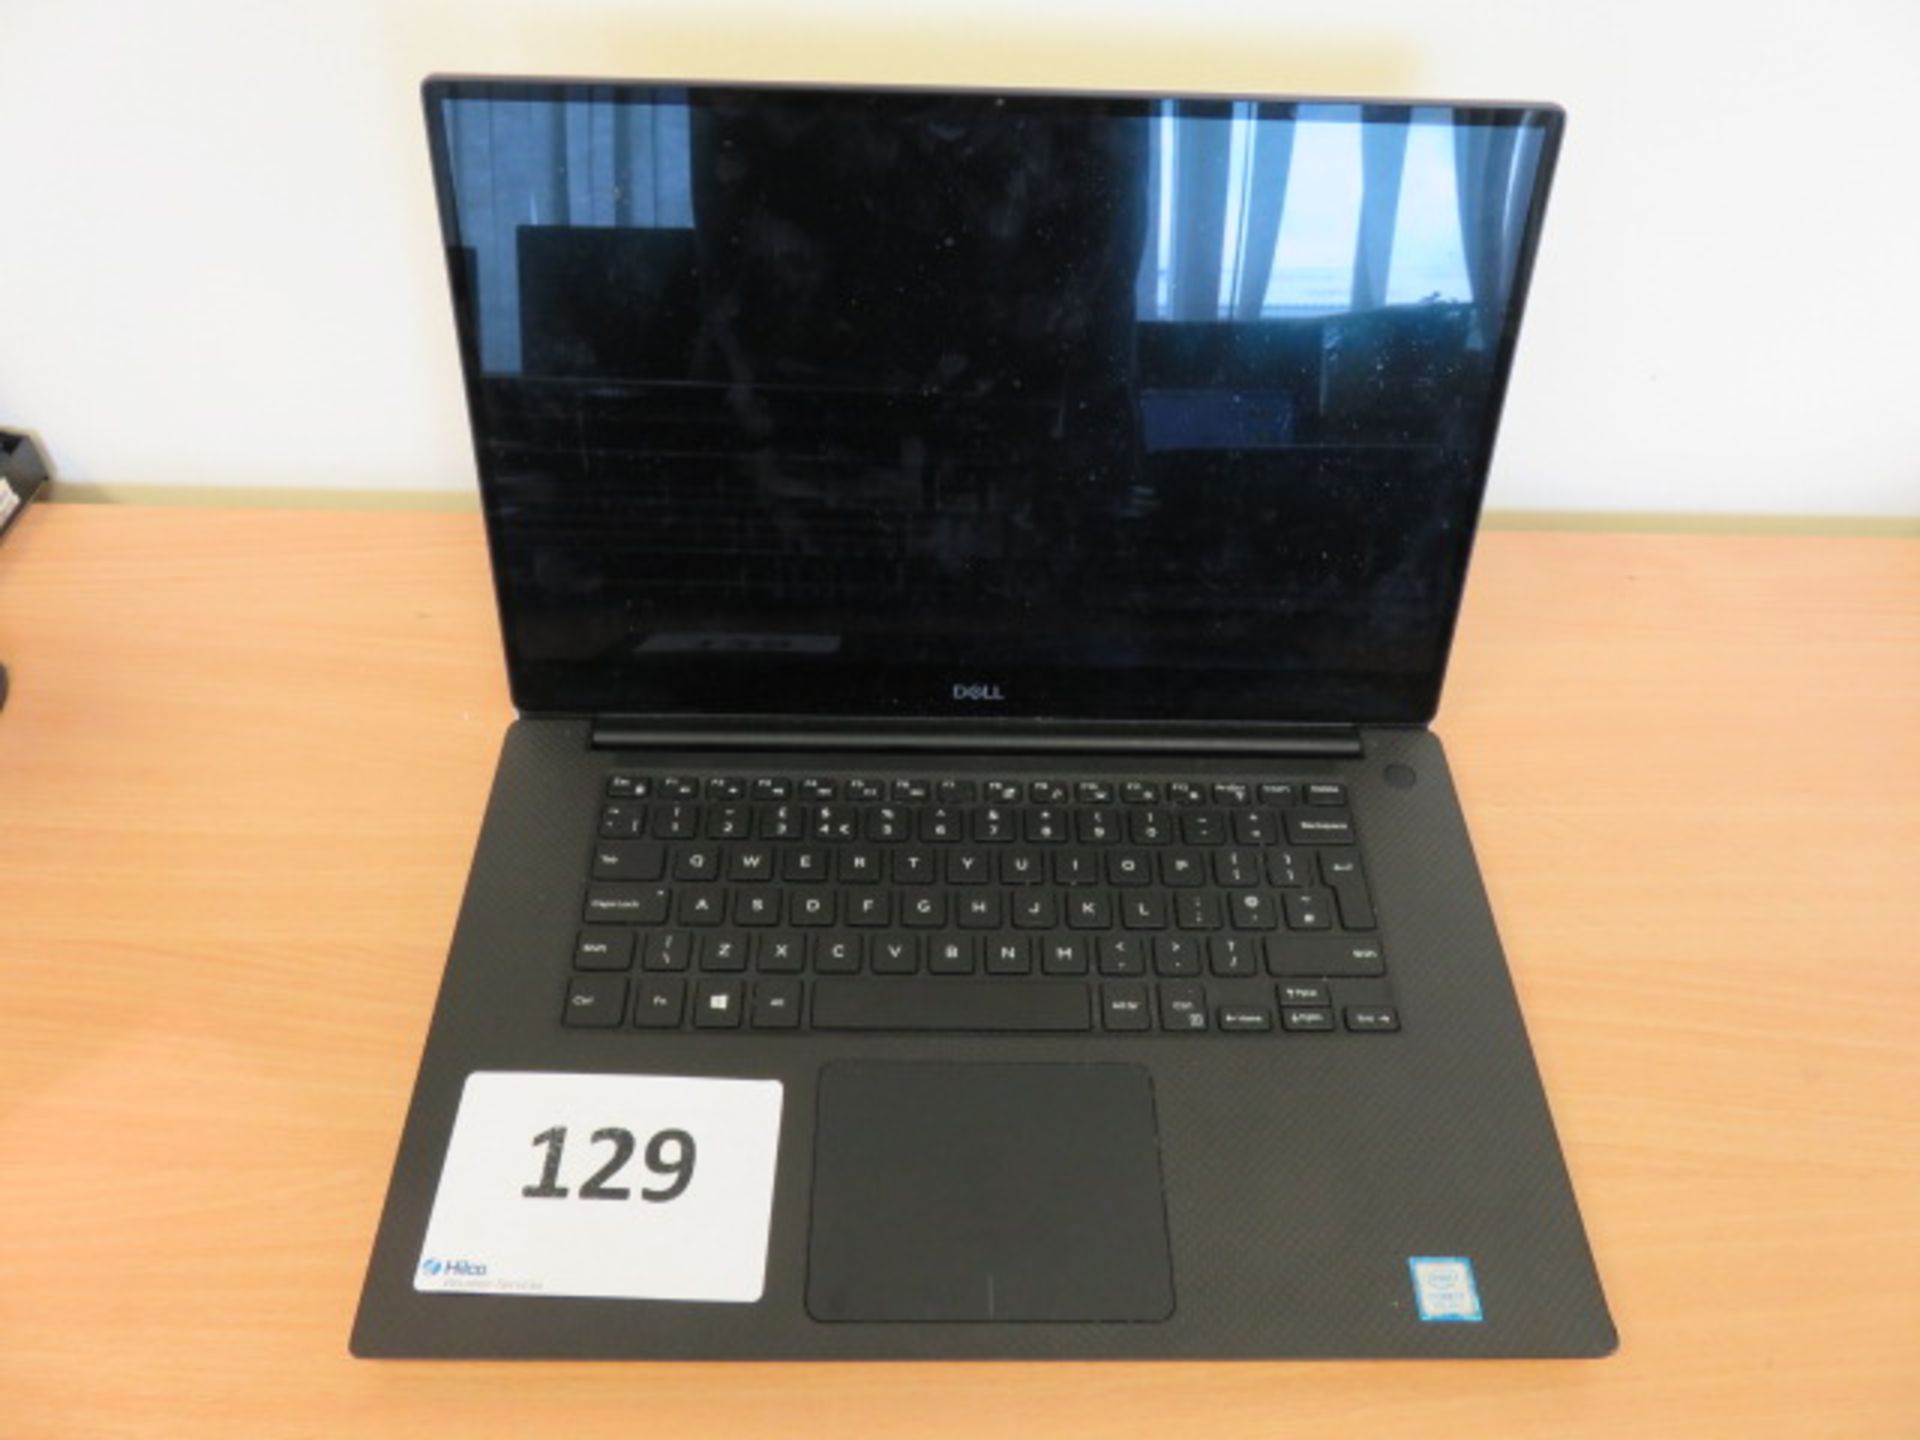 Dell XPS 15 7590 15in Core i7 9th Gen Laptop Serial No. 1RF8M33 (2020) (Asset No. LTW-272) (Dented o